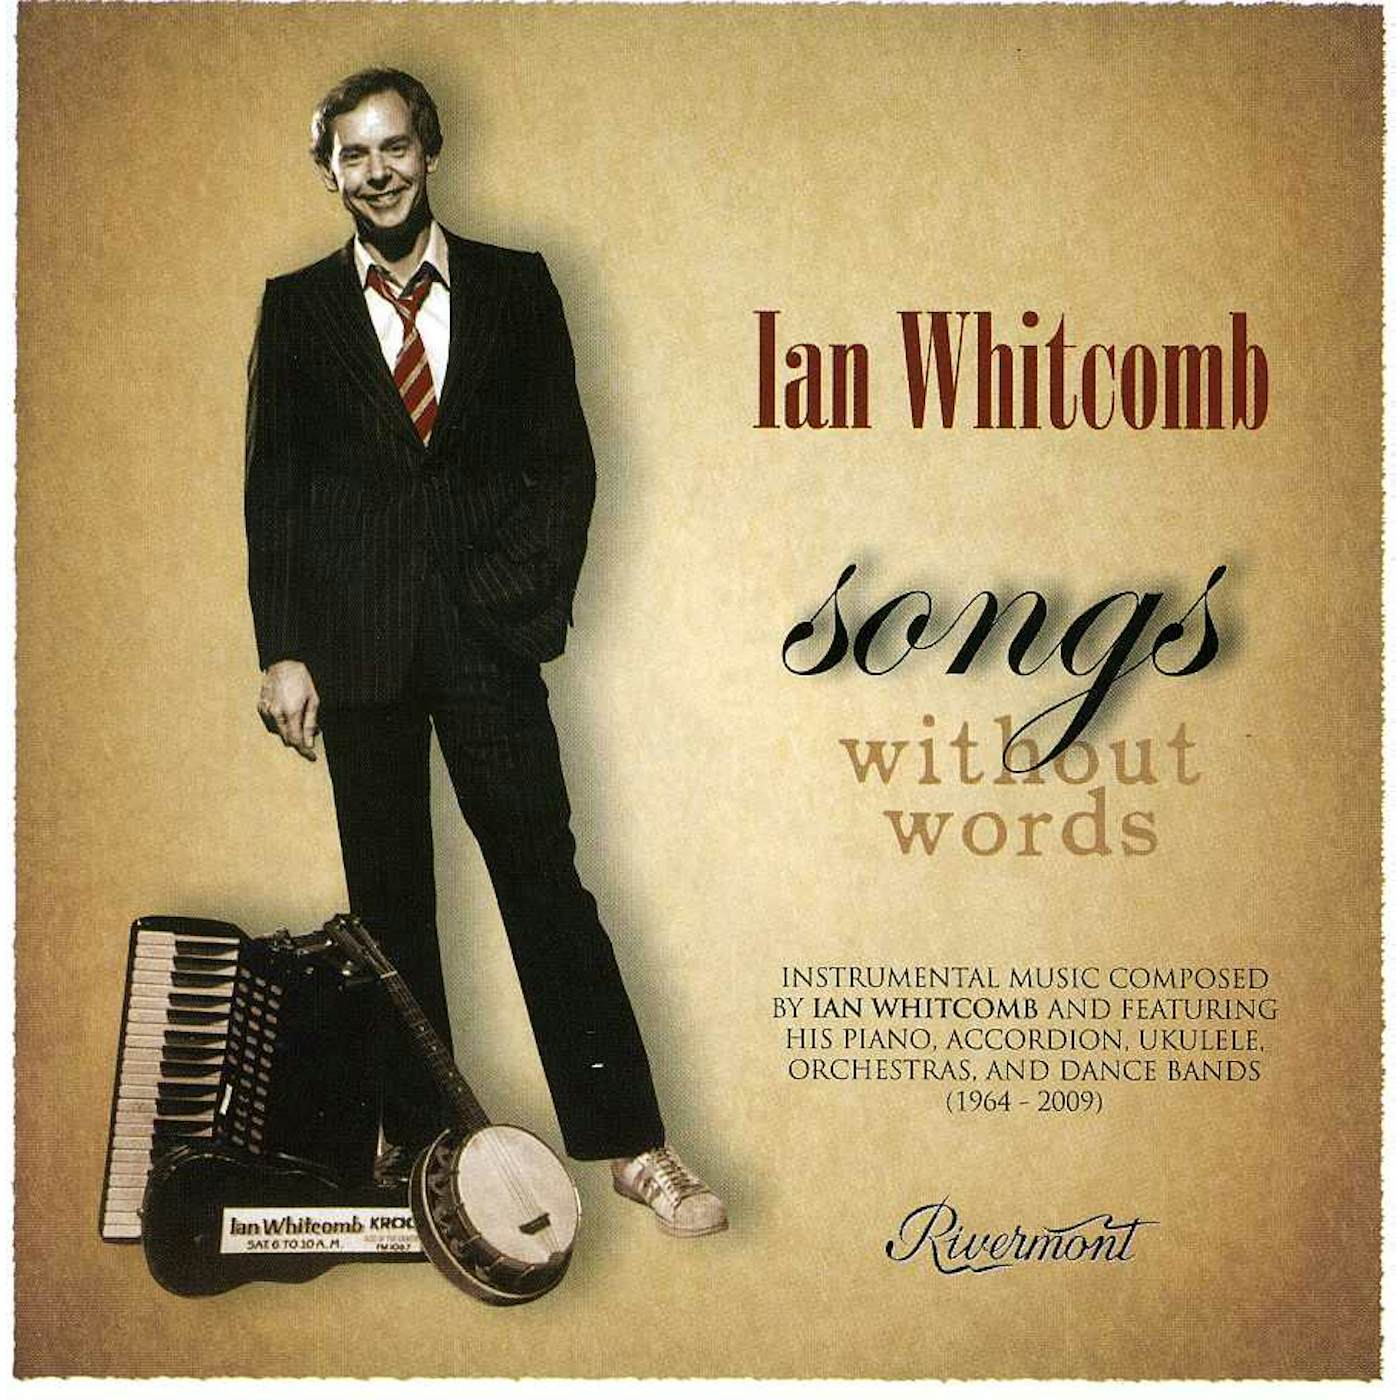 Ian Whitcomb SONGS WITHOUT WORDS CD